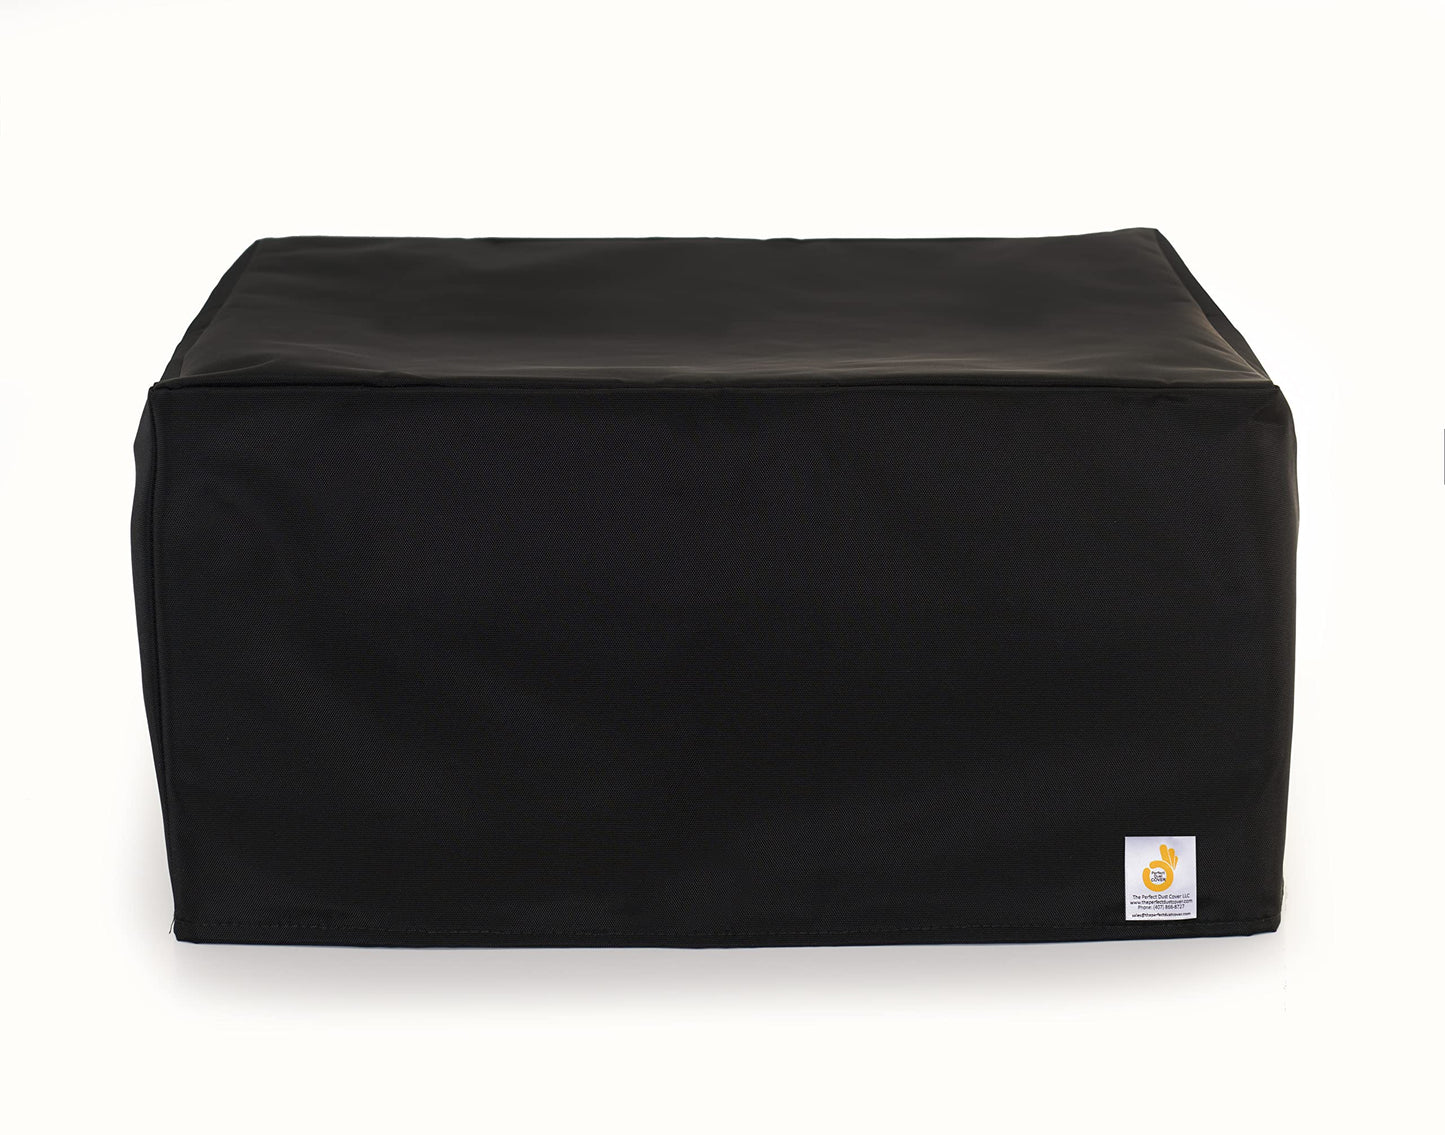 The Perfect Dust Cover, Black Nylon Cover for Epson Expression Premium XP-6000 Small-in-One Printer, Anti Static Waterproof and Double Stitched Cover by The Perfect Dust Cover LLC